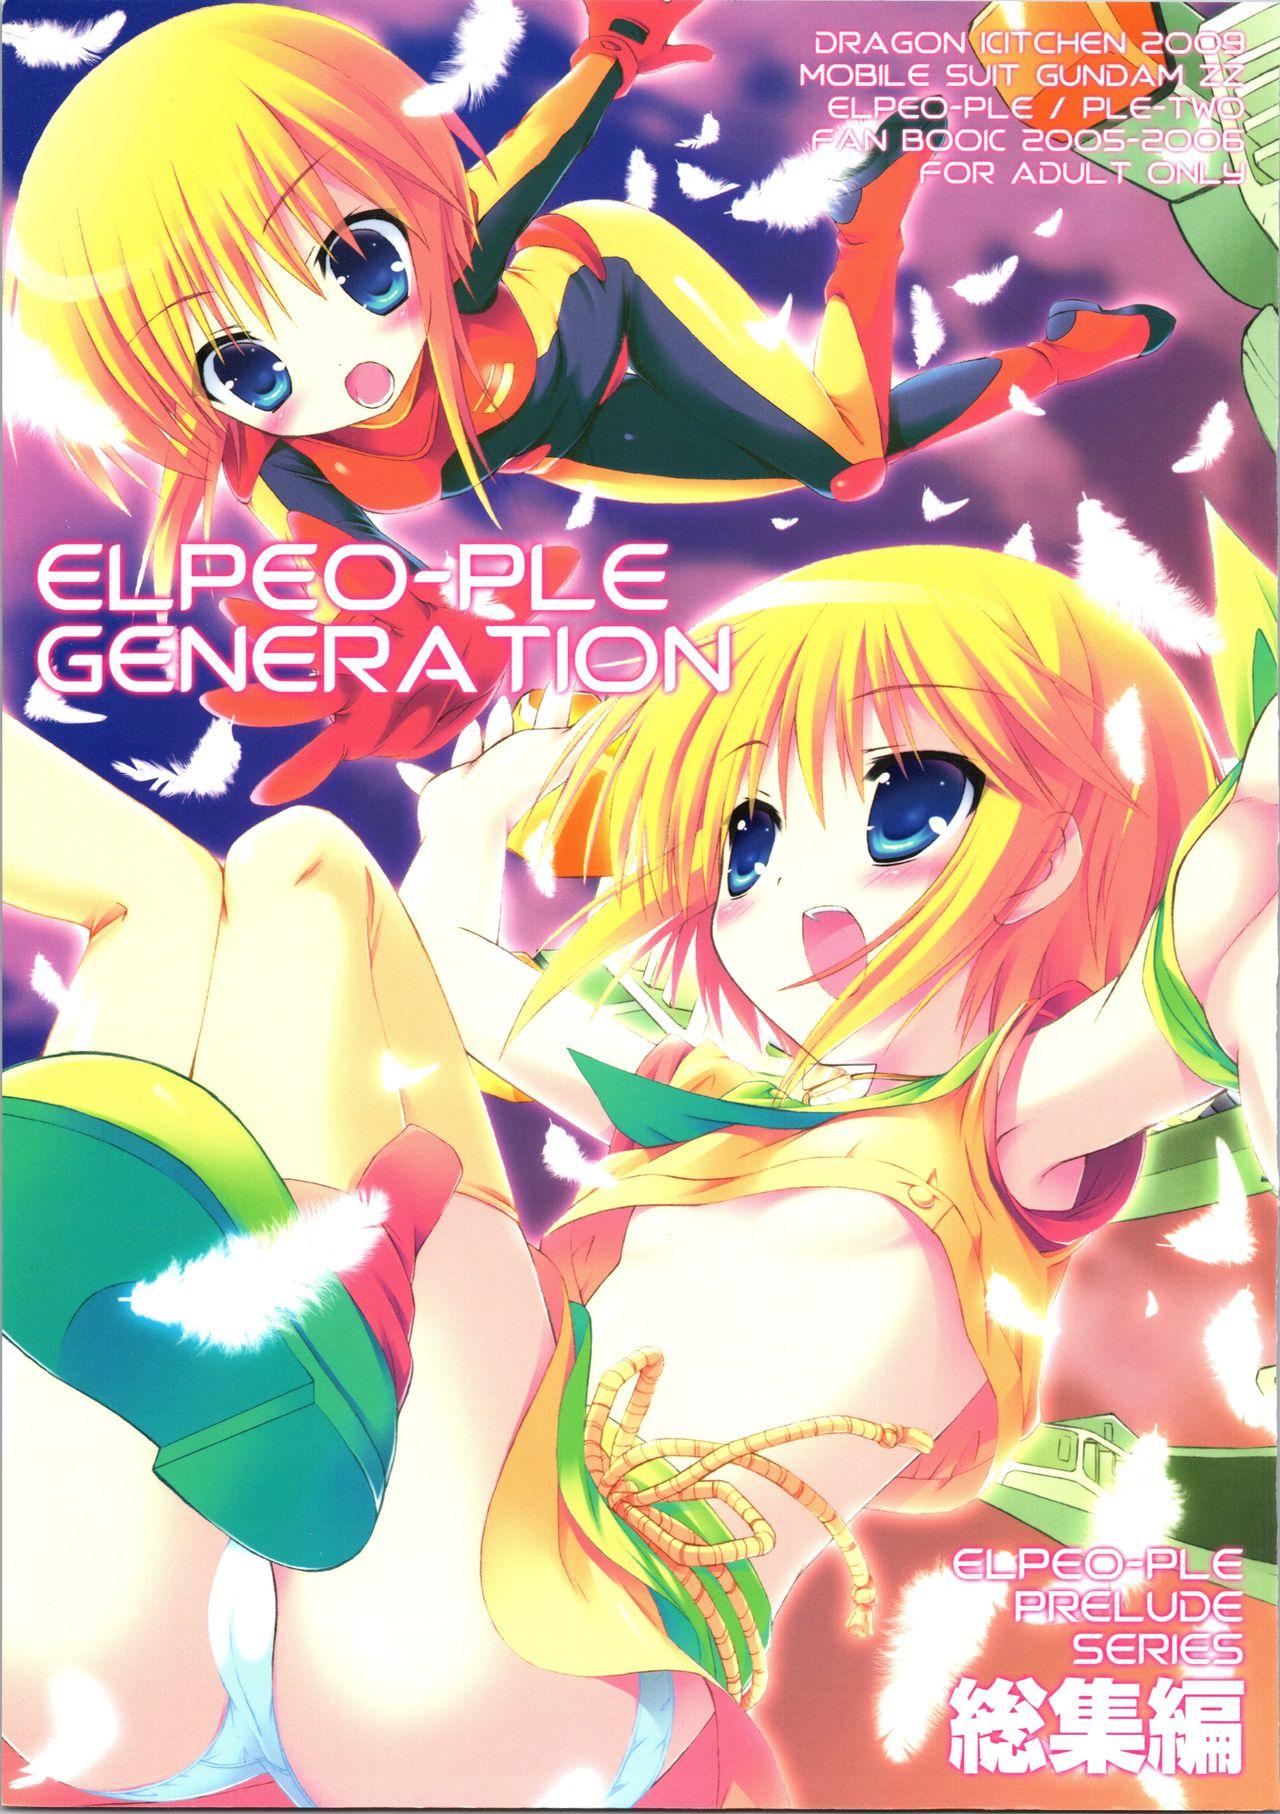 ELPEO-PLE GENERATION EVENT LIMITED EDITION 6